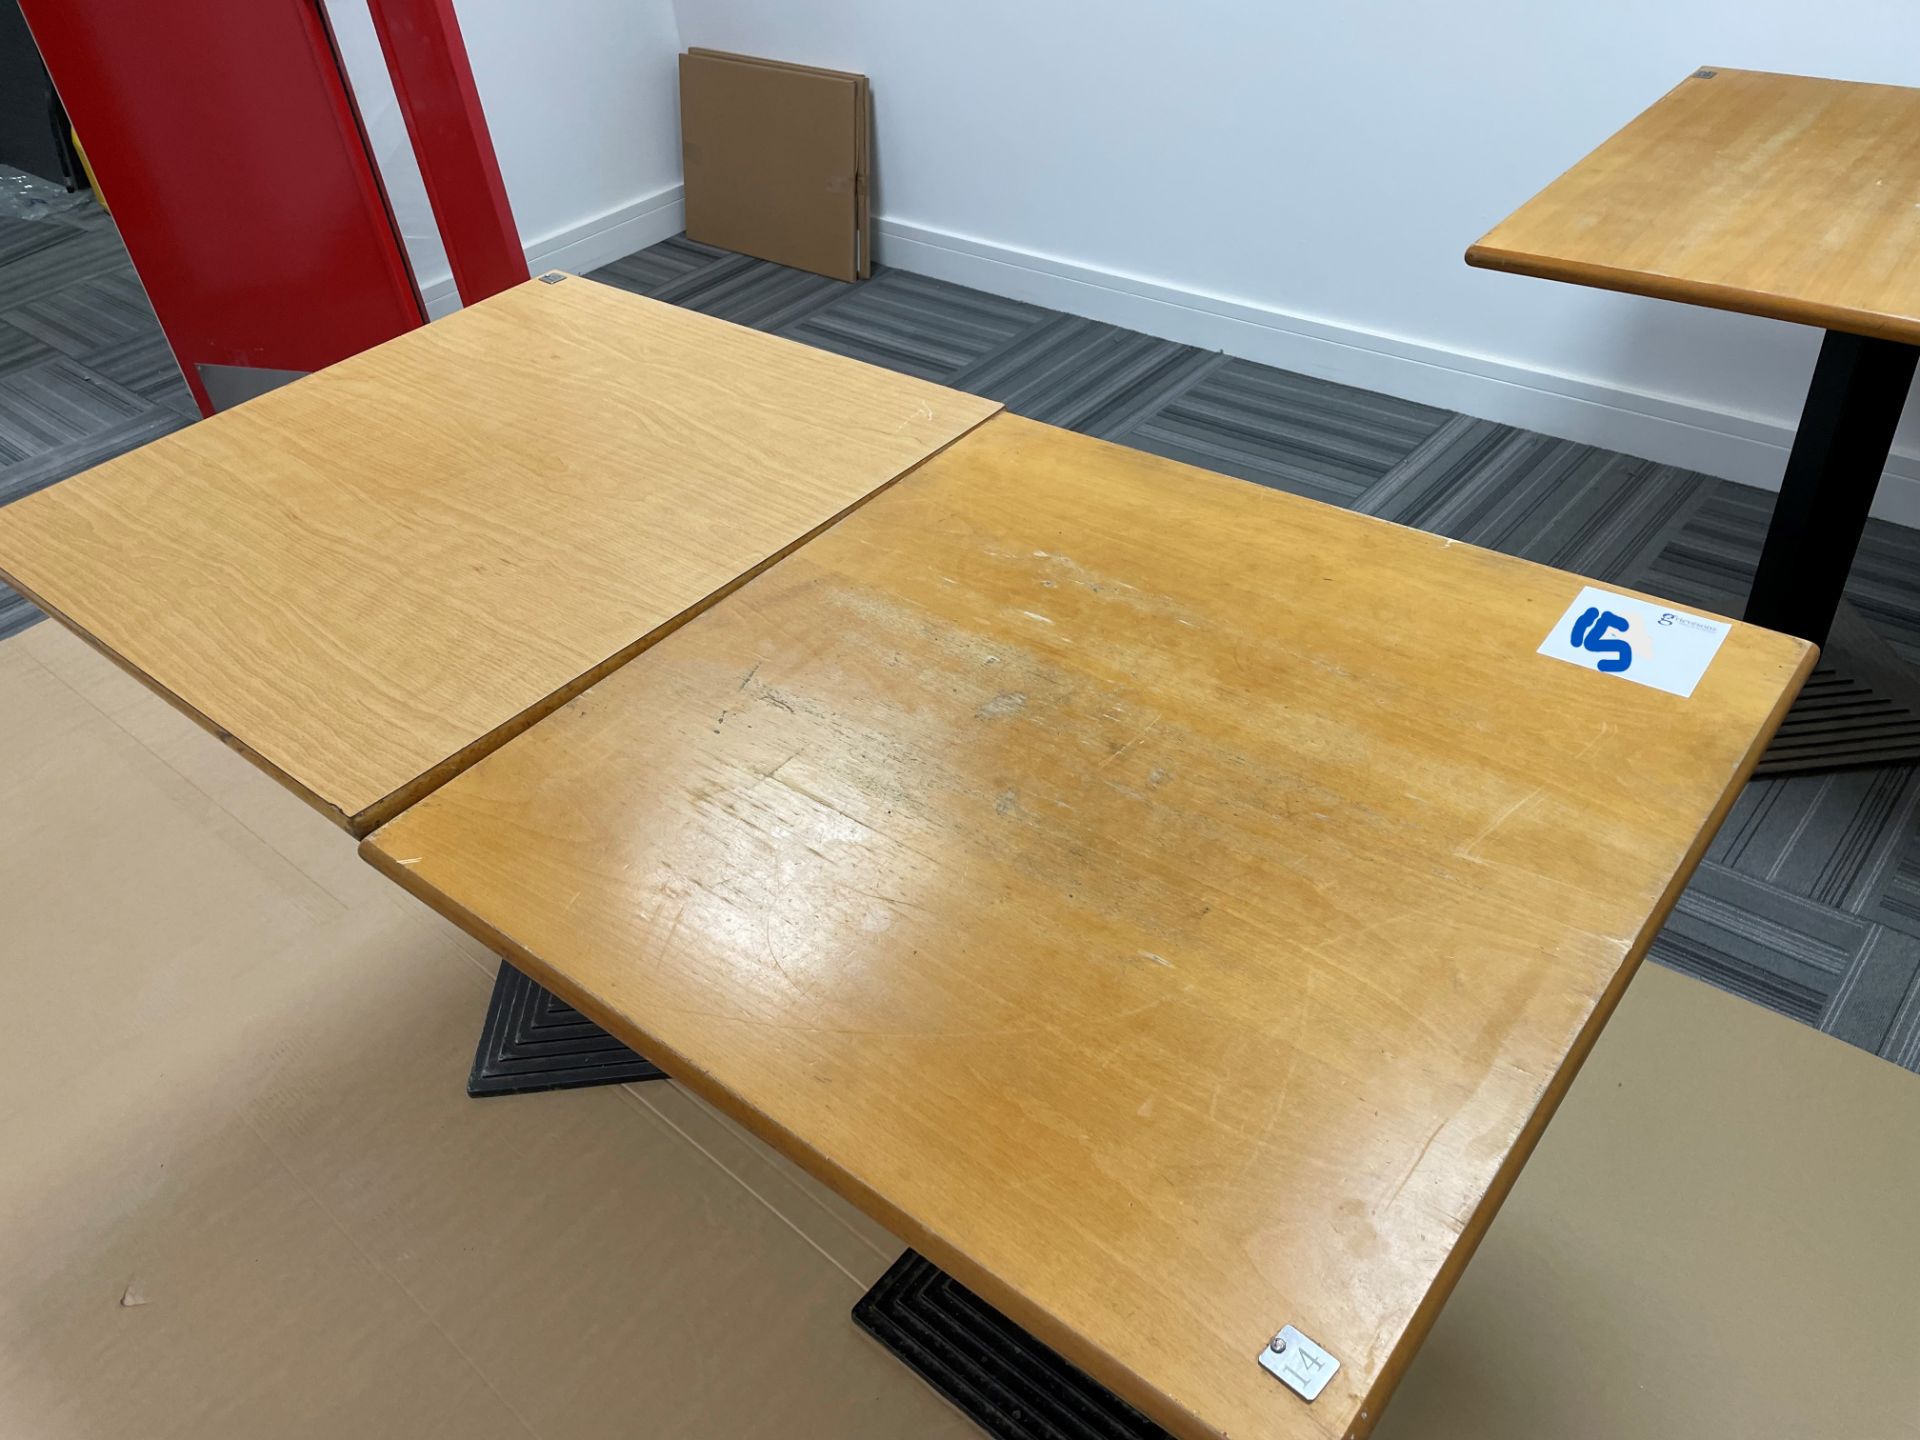 PAIR OF 750 x 750 BISTRO TABLES